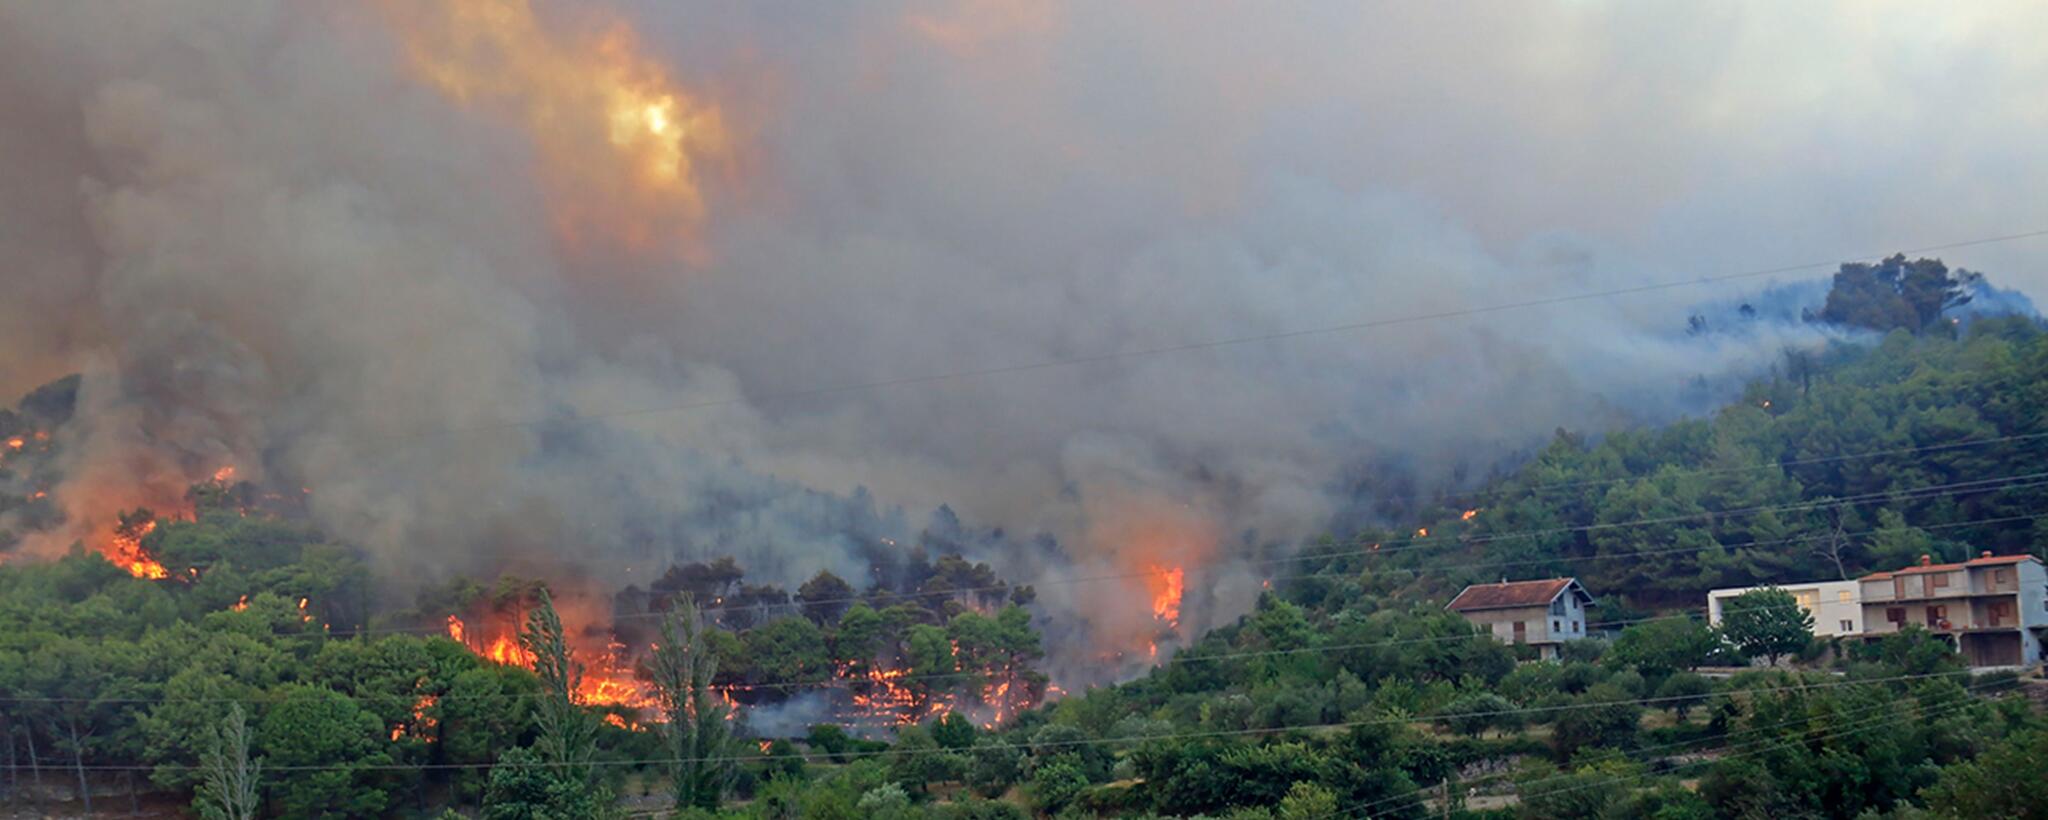 A wildfire rages on a hill side near houses